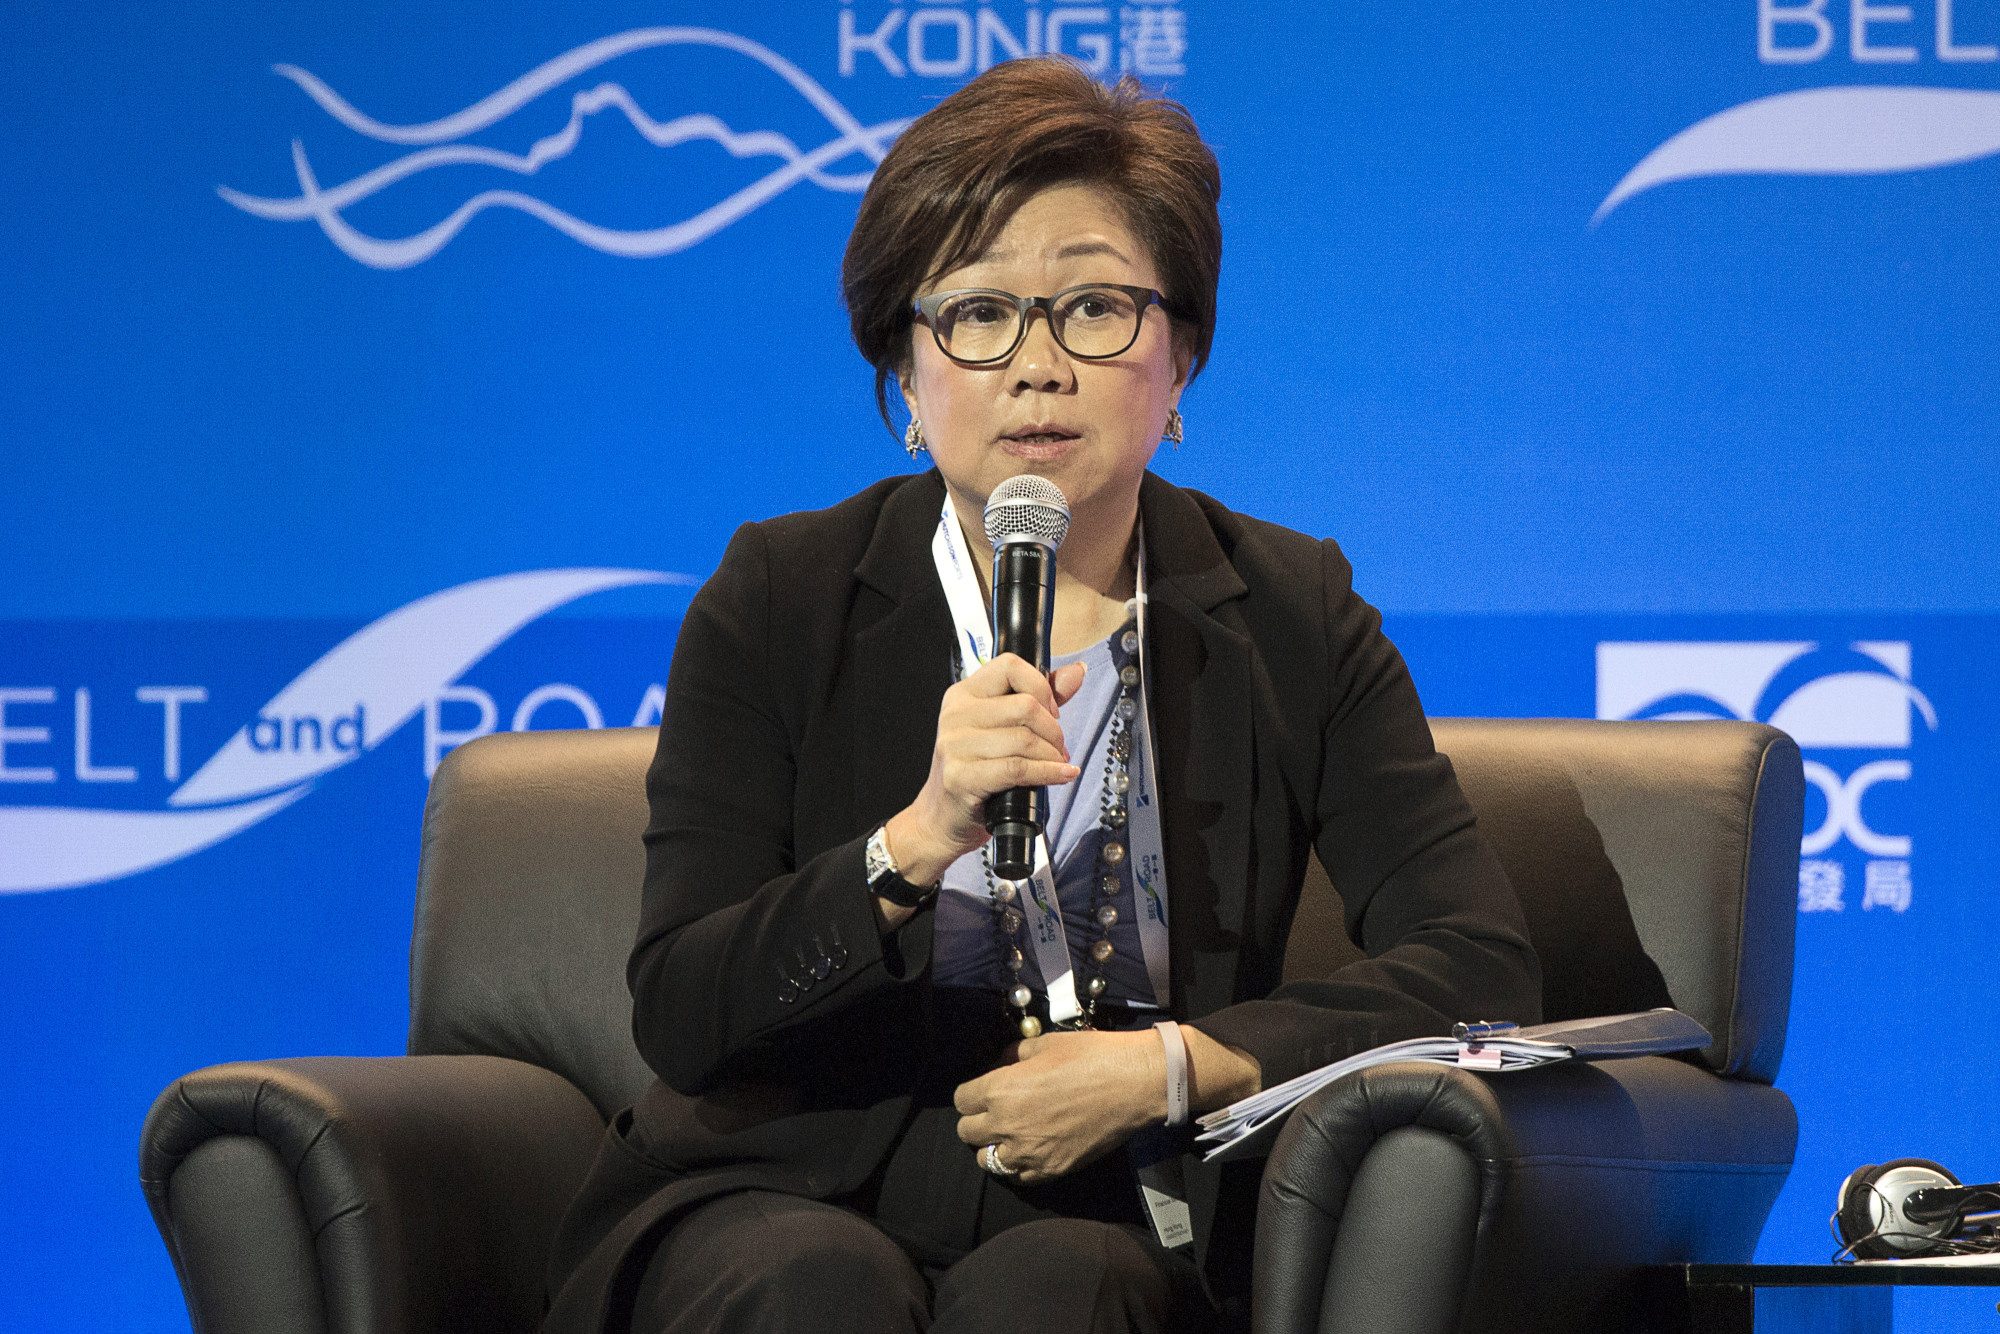 HKEX board appoints Laura Cha as first female chairman